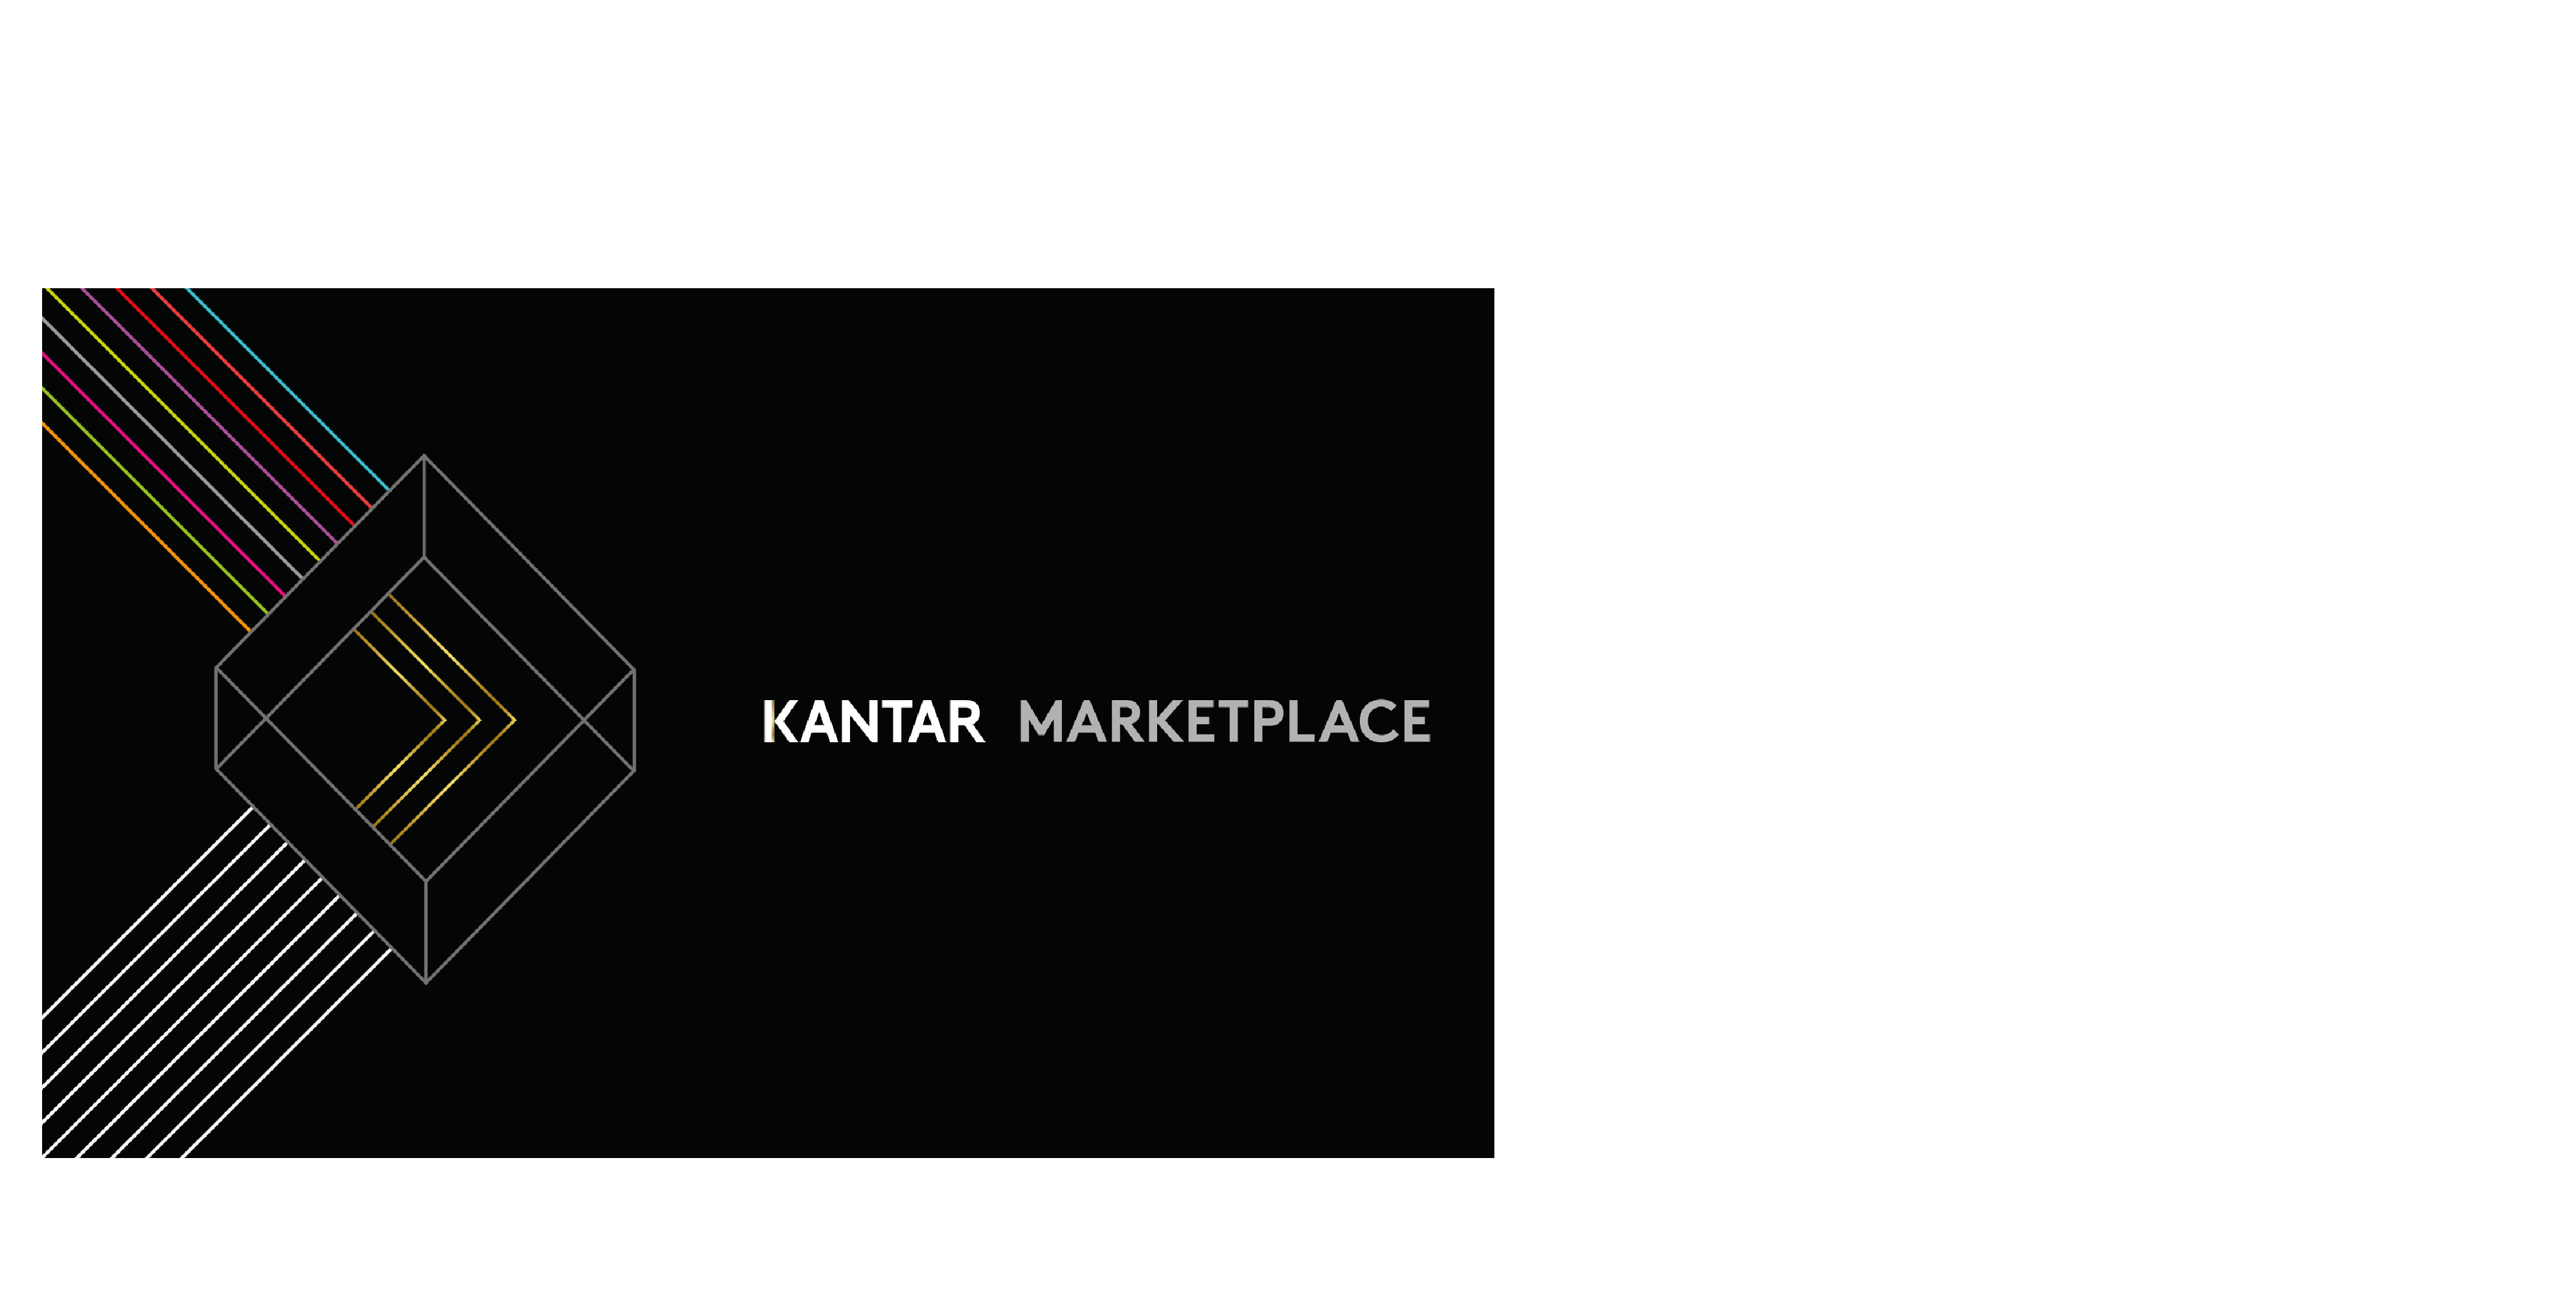  Kantar Marketplace is live in Taiwan - Part of an exciting journey with 100 world top advertisers…